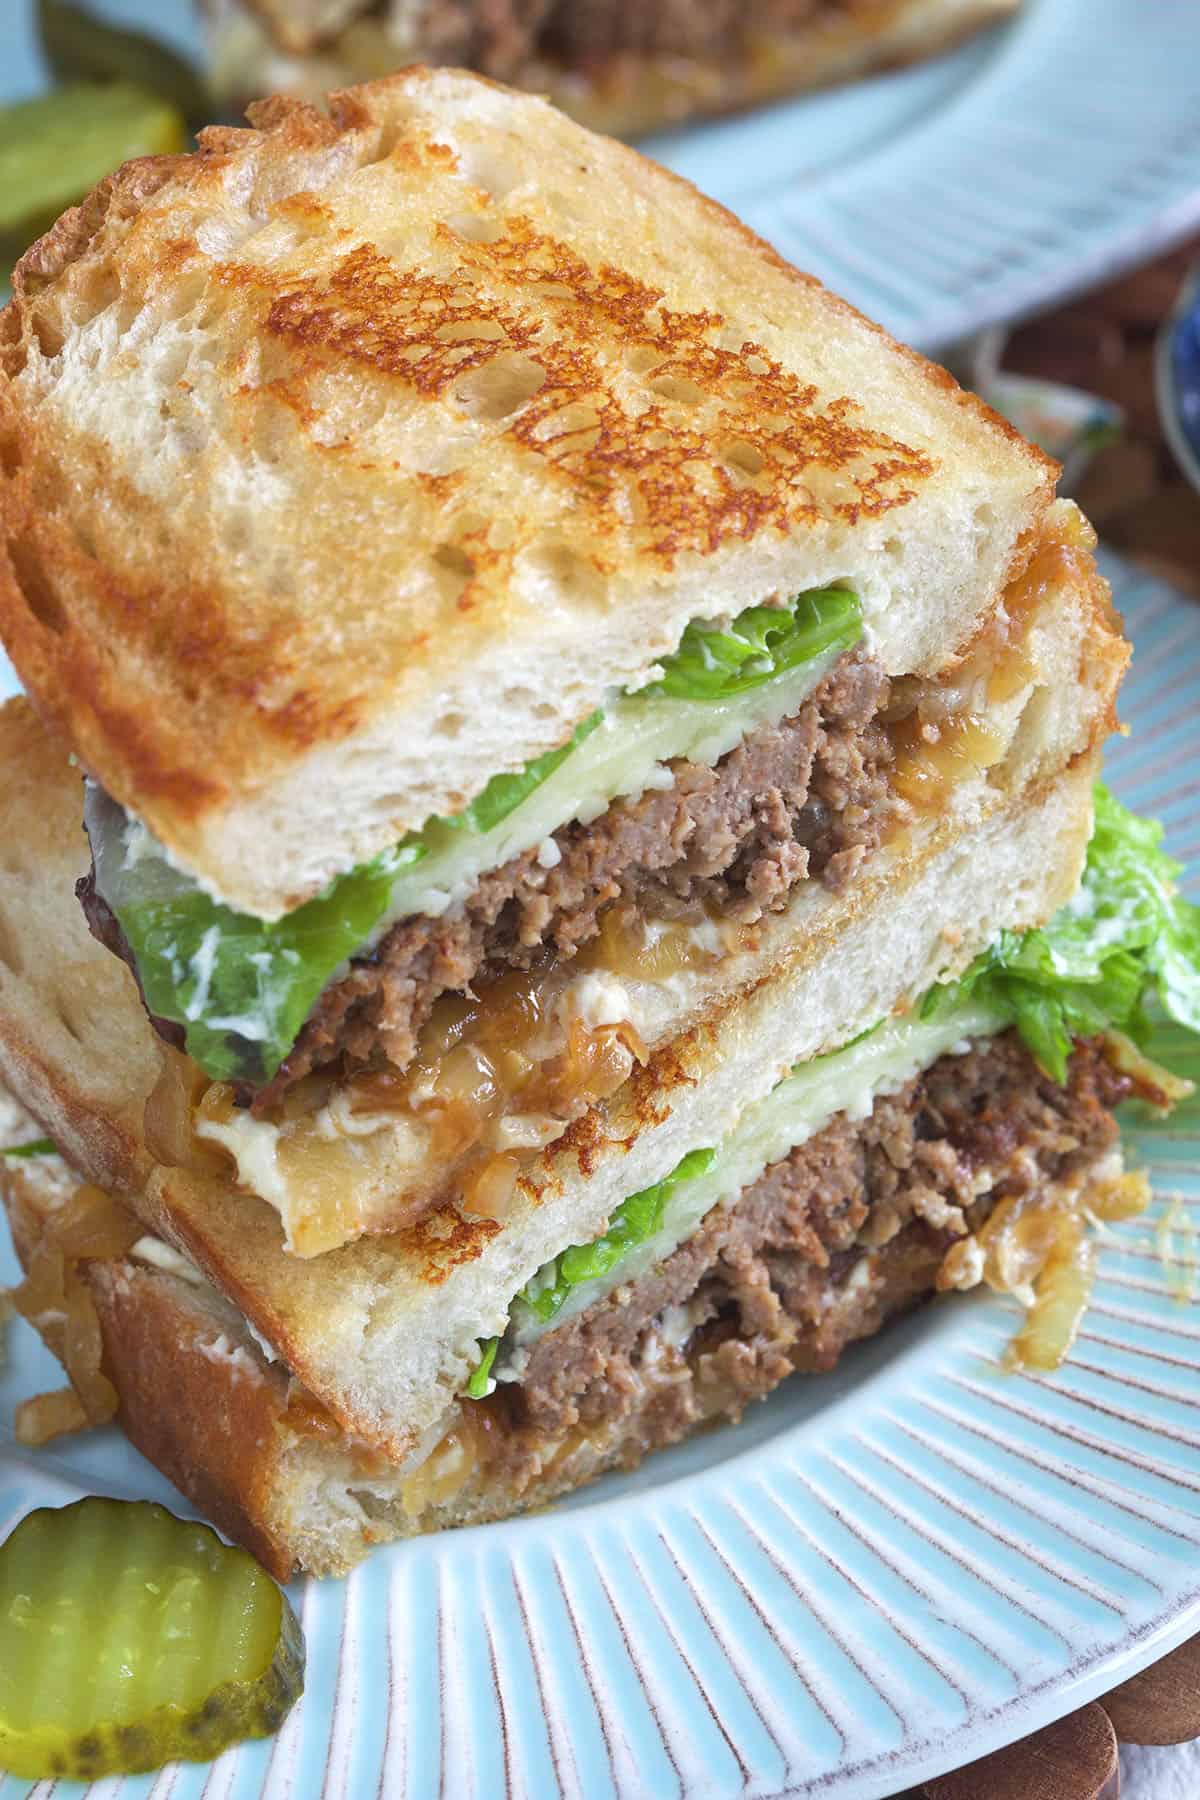 A halved meatloaf sandwich is stacked on a plate.